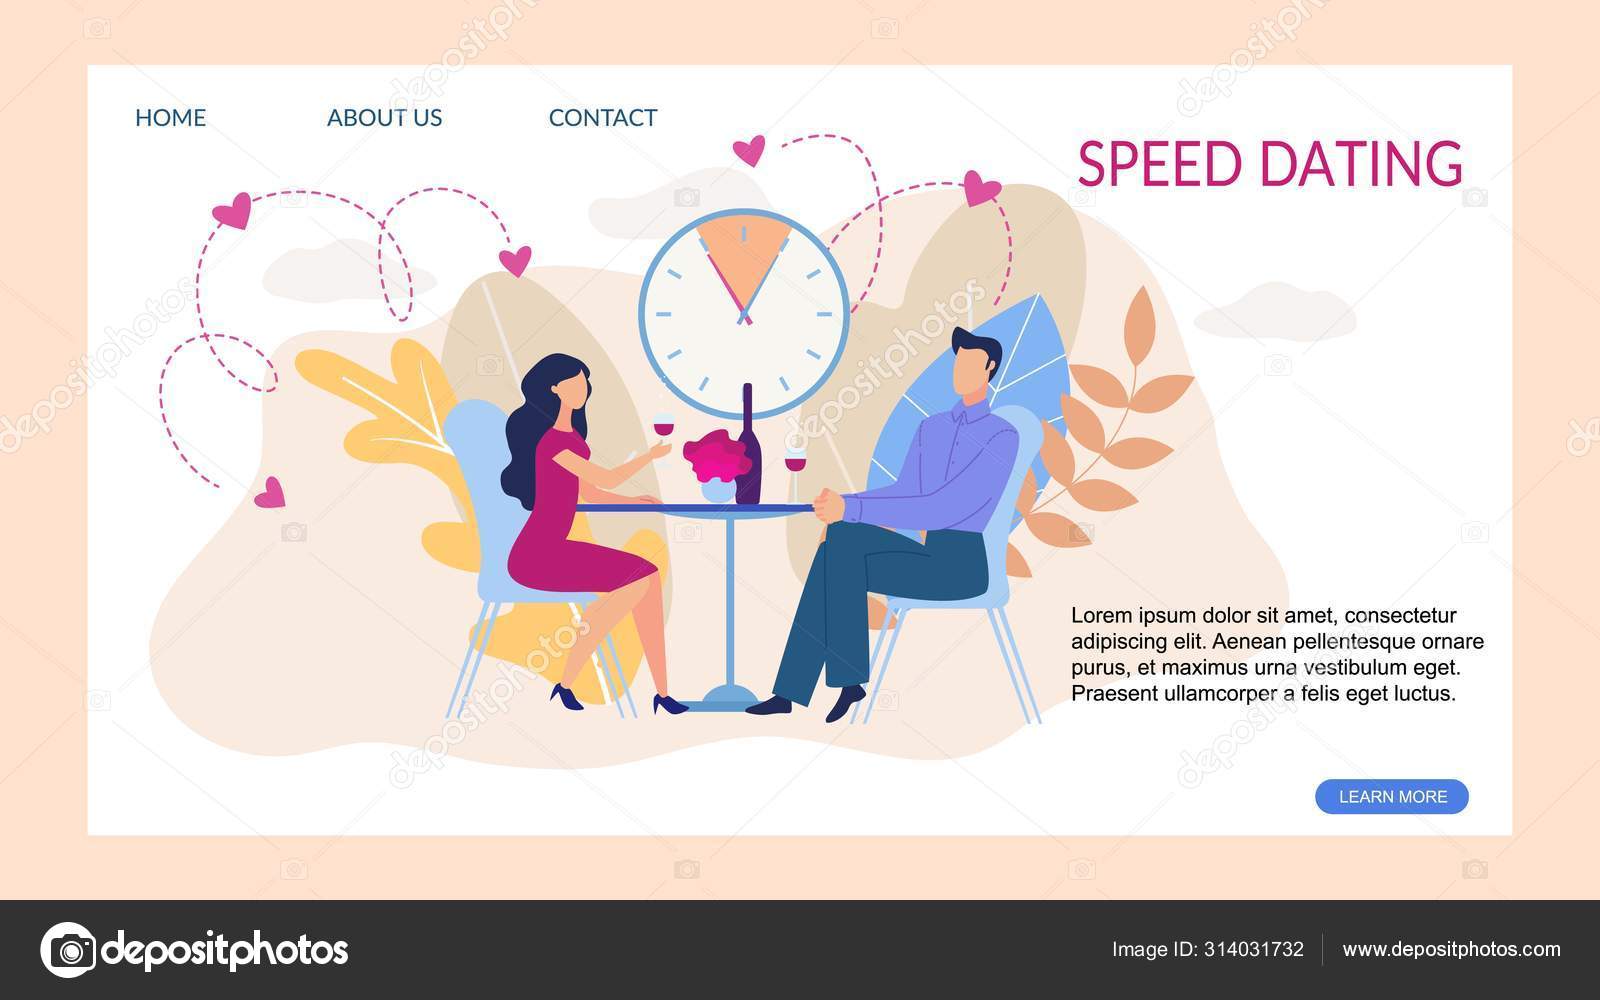 Speed dating for threesomes